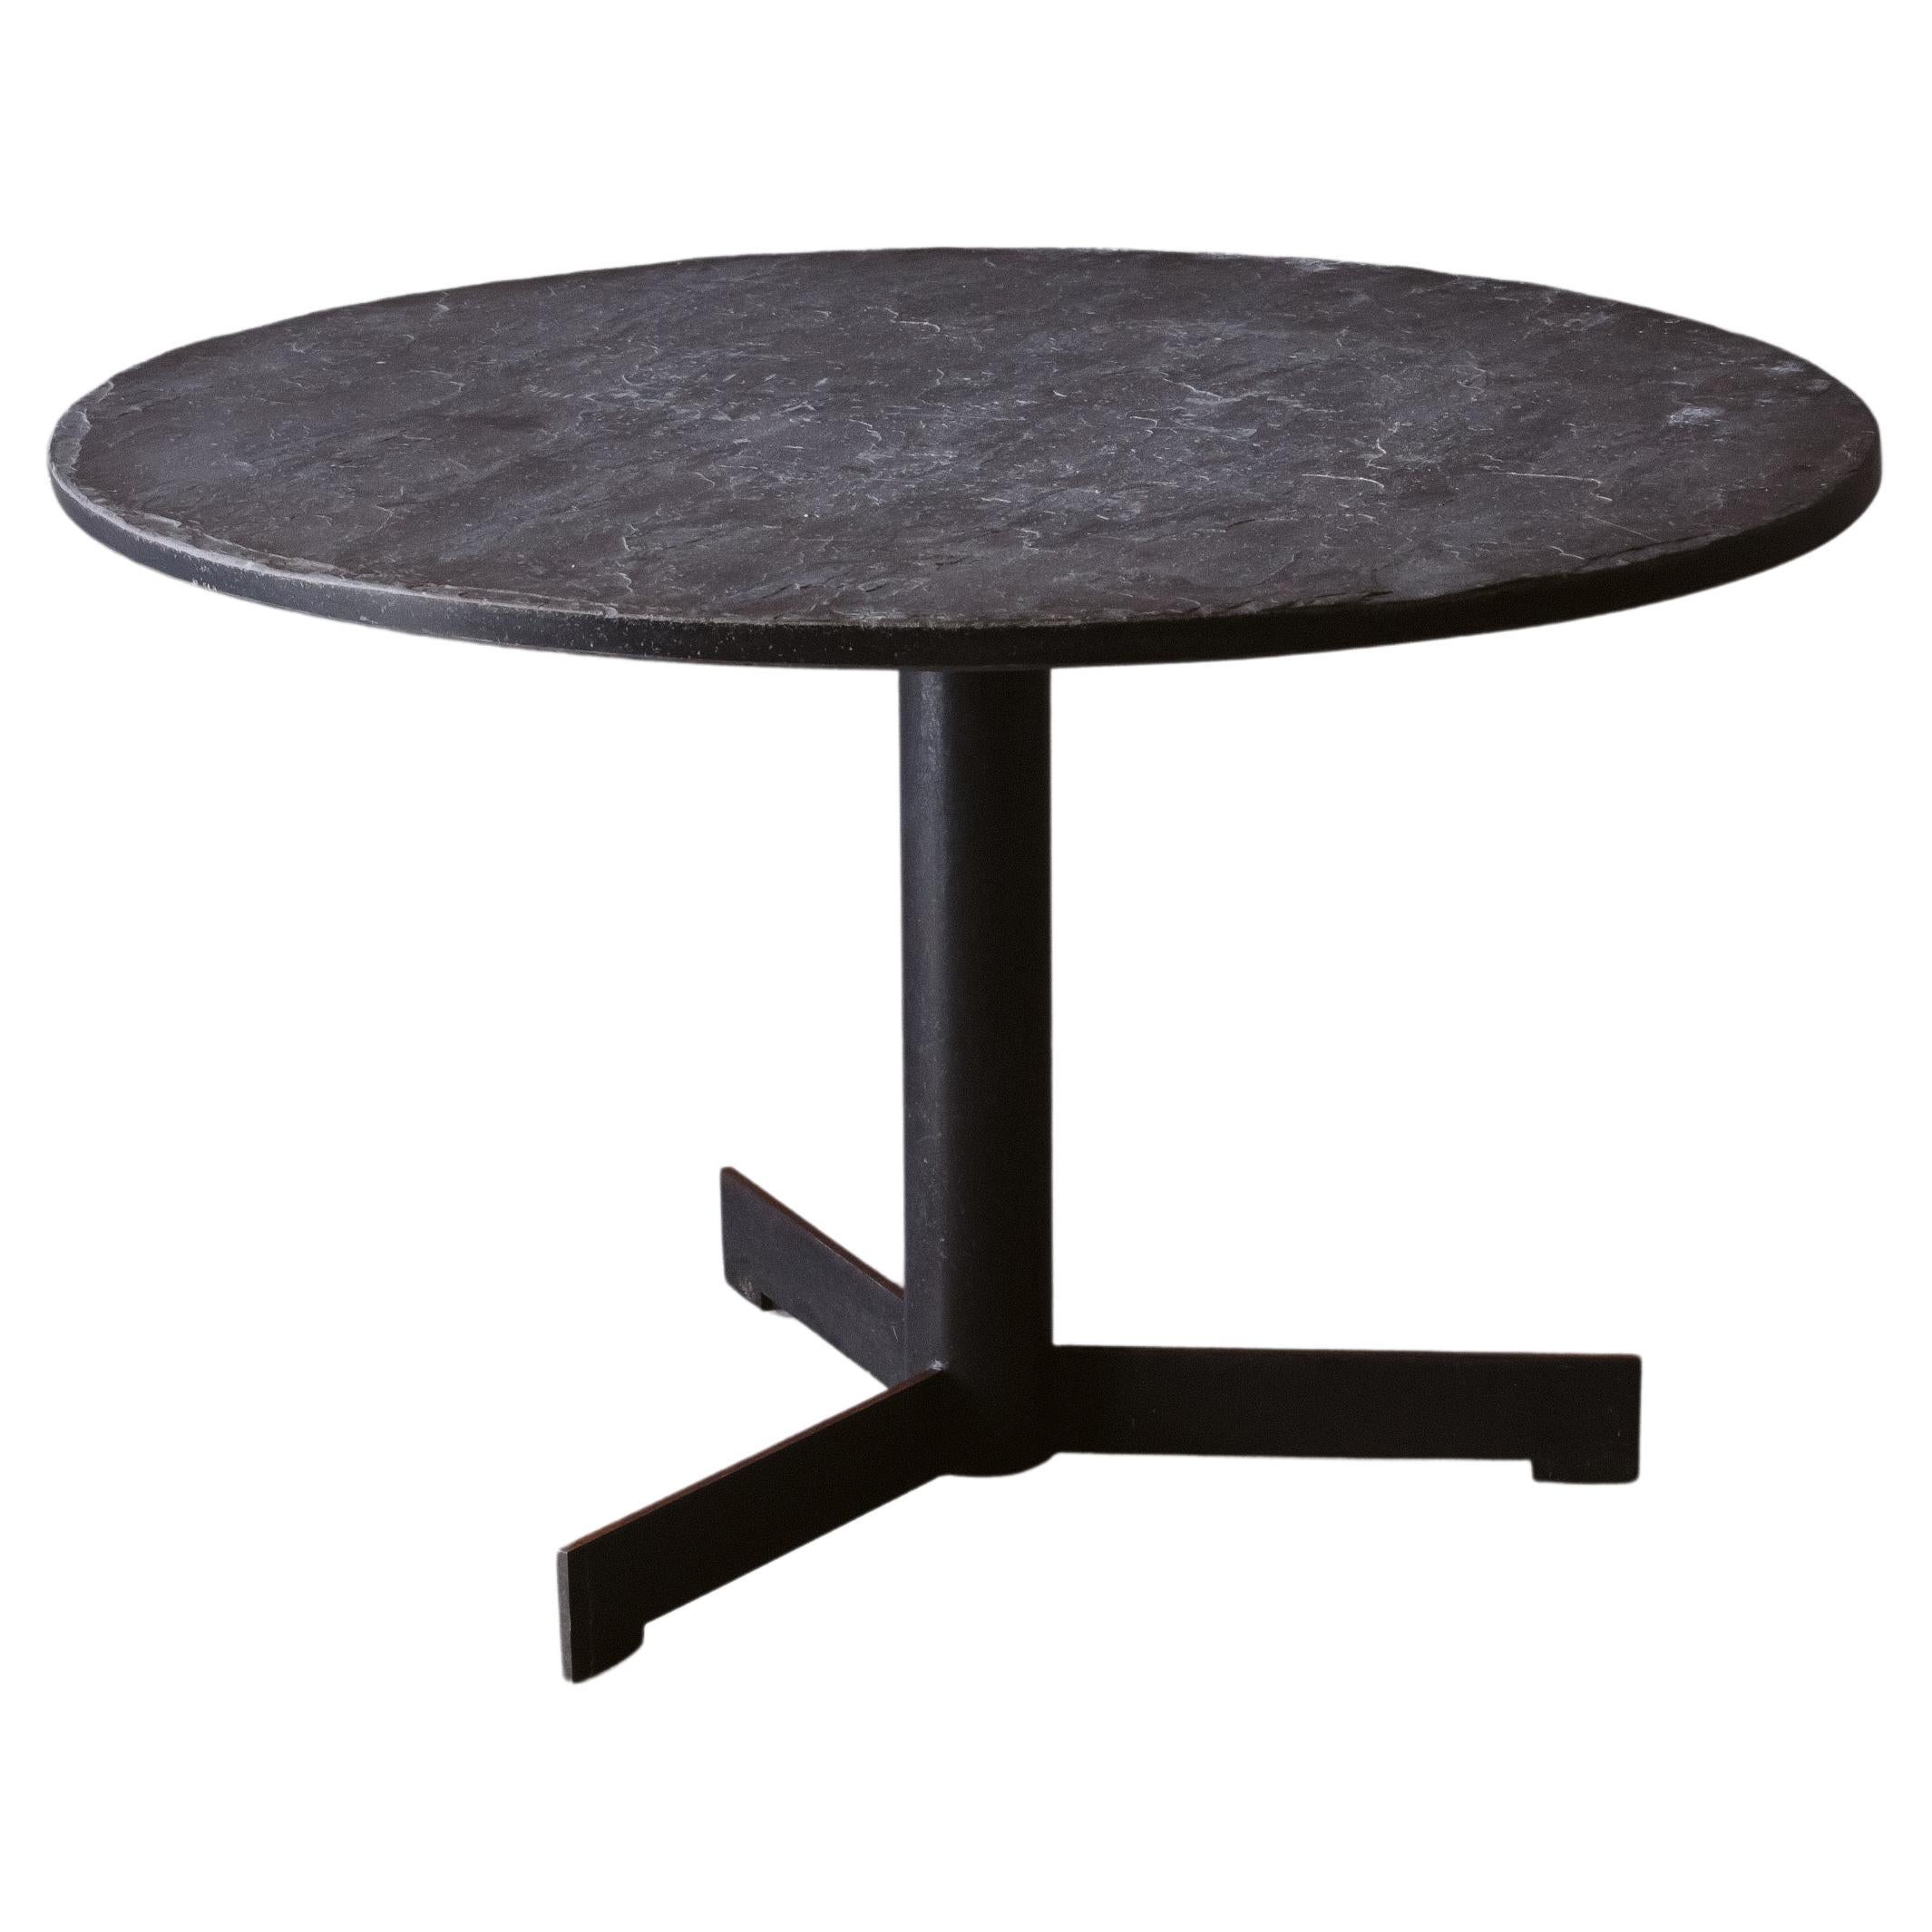 Vintage Slate Dining Table from Belgium, circa 1970s